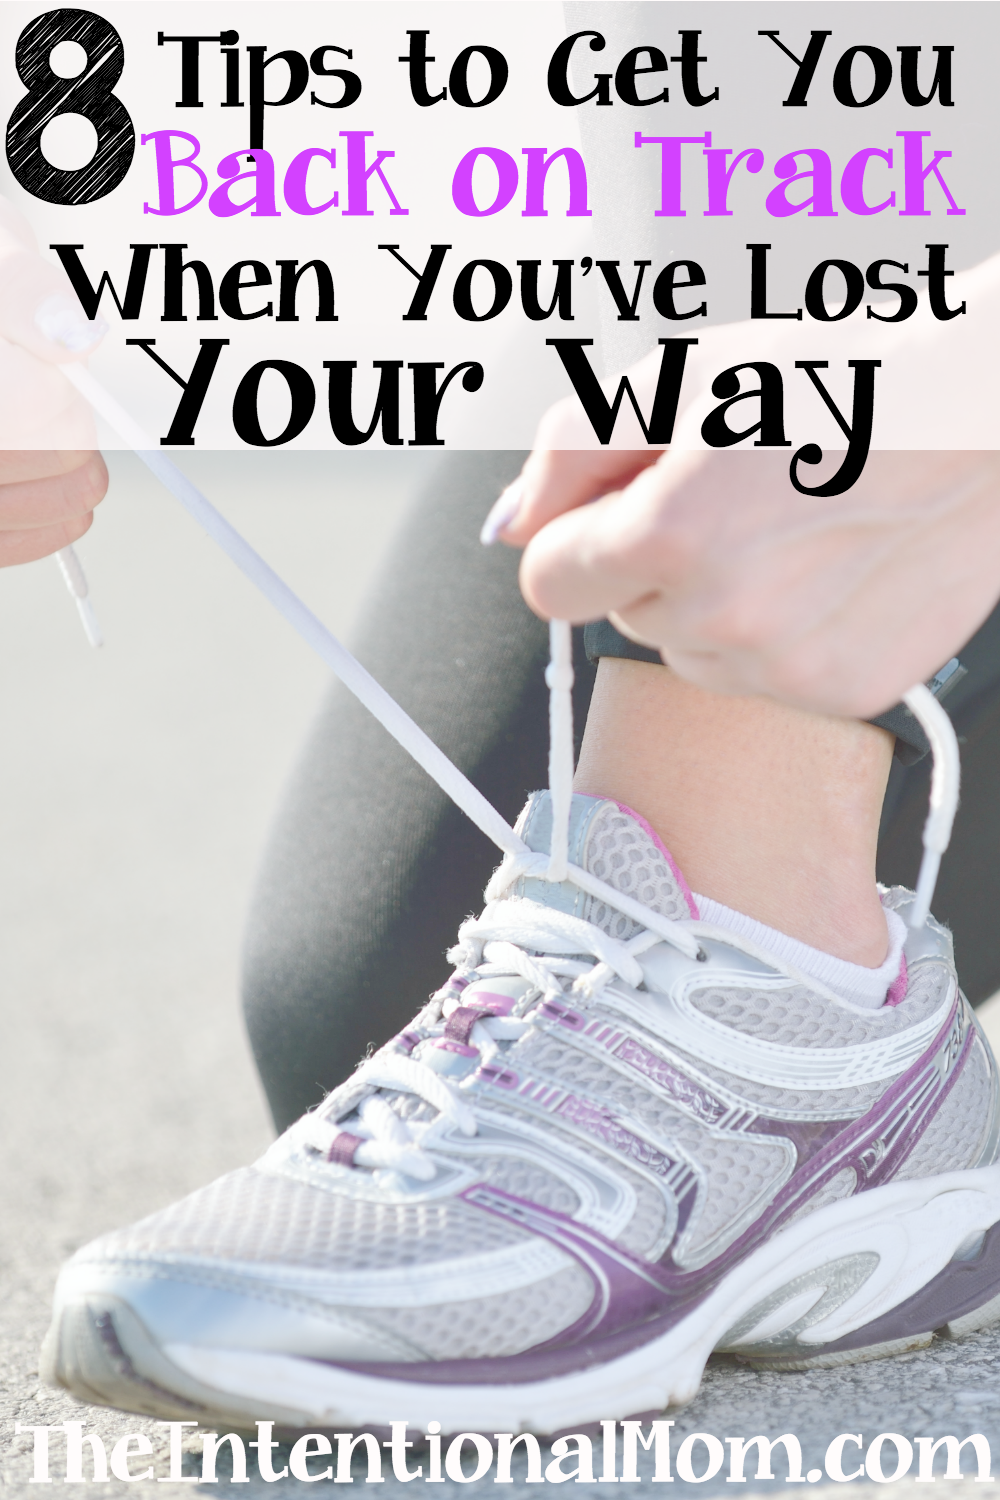 8 Tips to Get You Back on Track When You’ve Lost Your Way